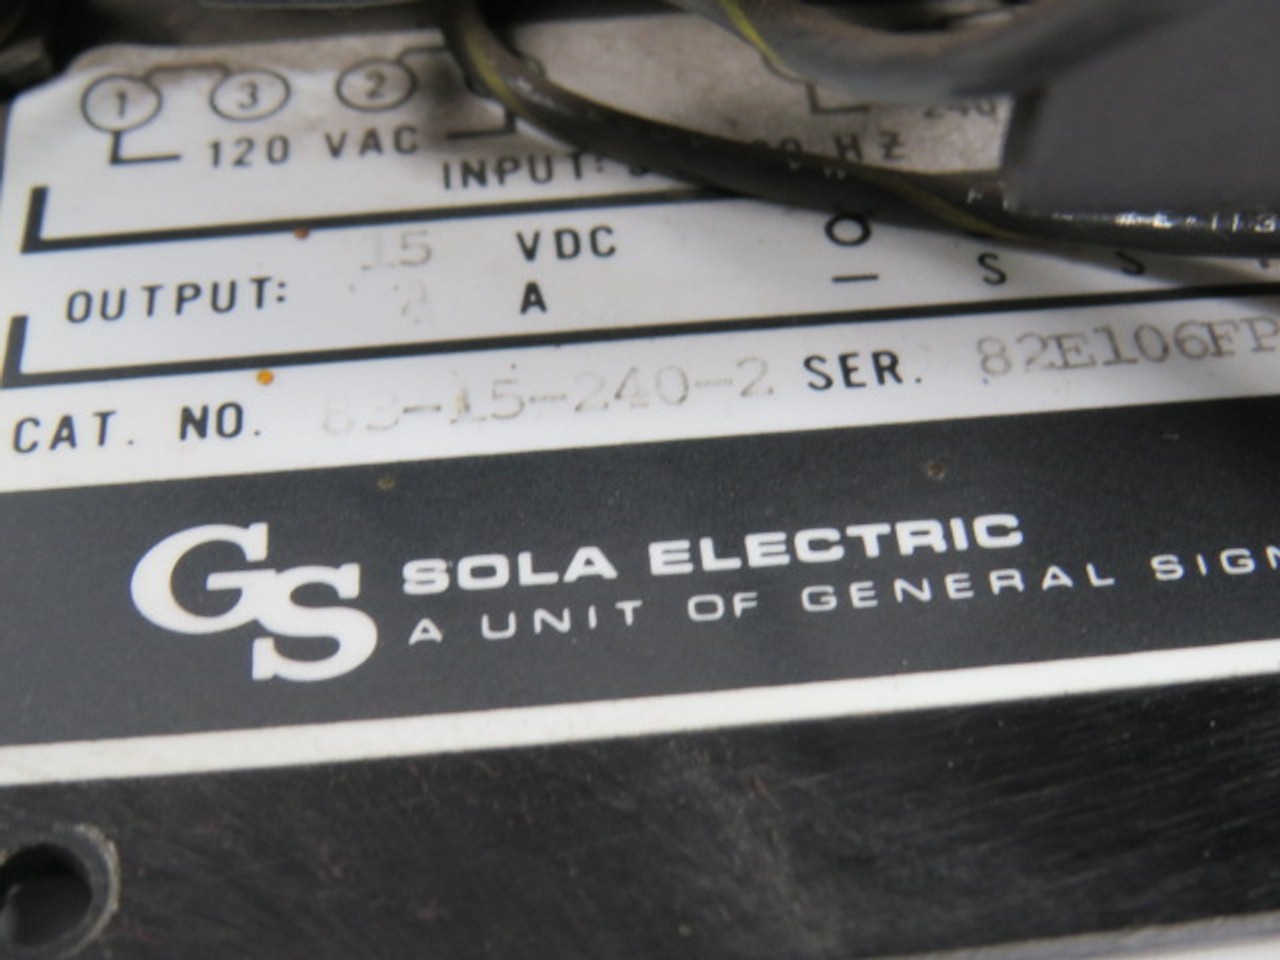 Sola Electric 83-15-240-2 Power Supply Series 82E106FP 4A 120/240VAC USED